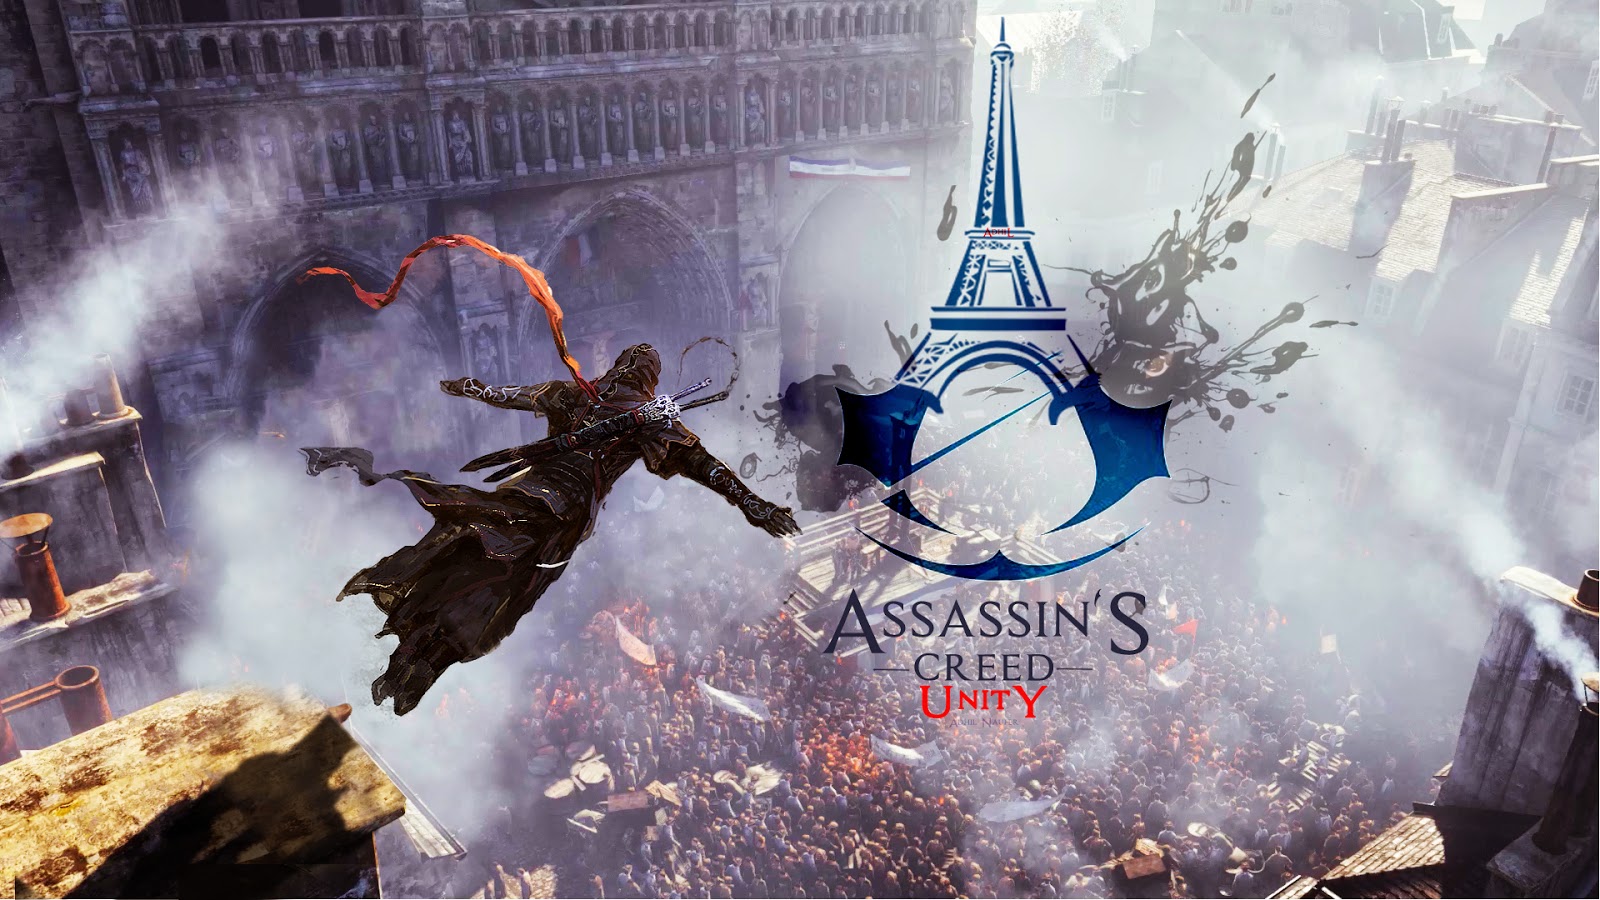 Review: Assassin's Creed Unity